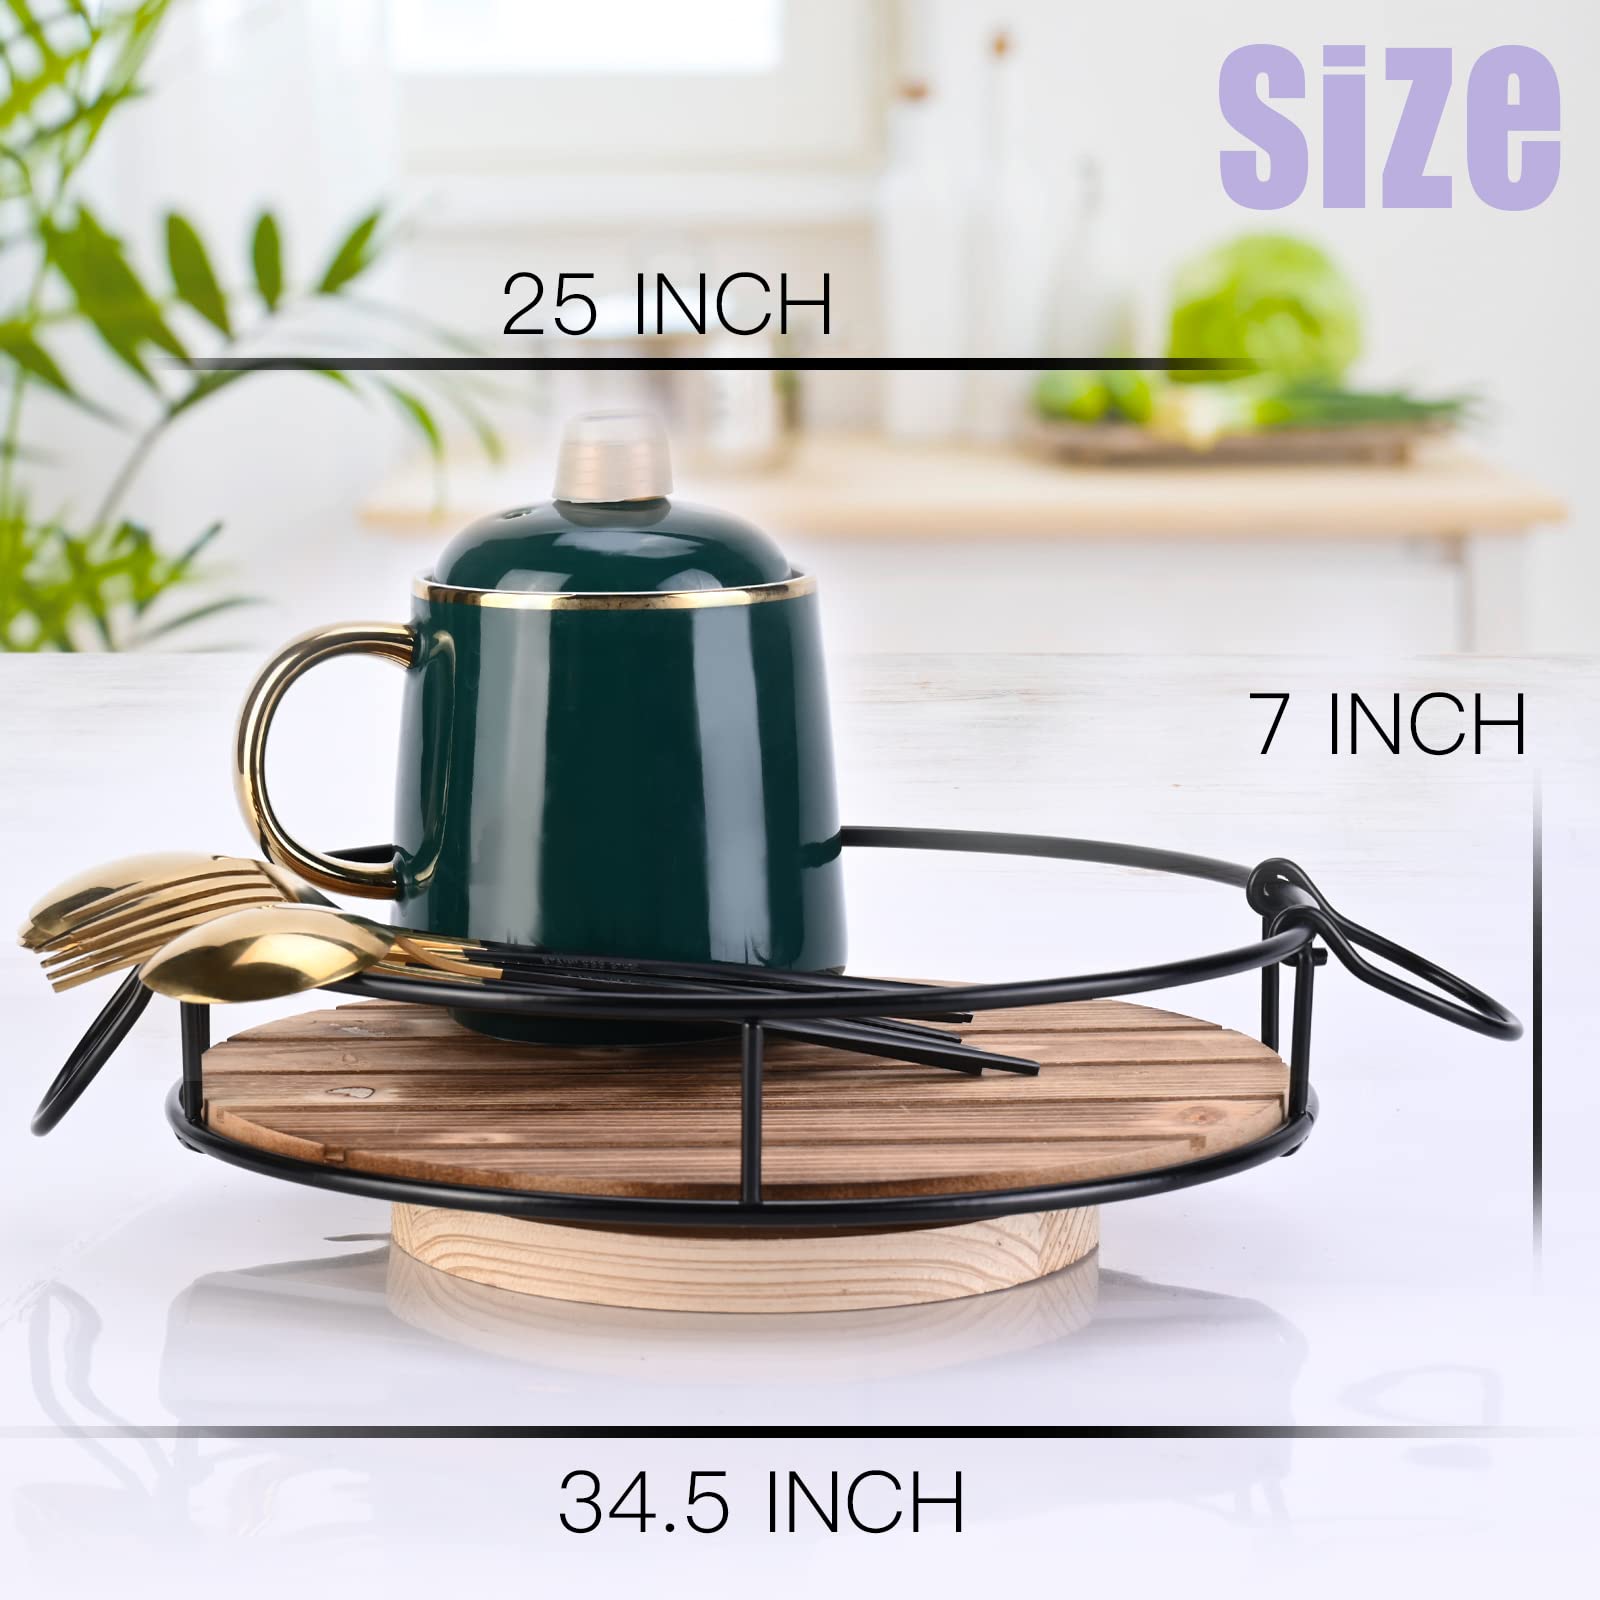 ZHUJERRY Lazy Susan Turntable for Cabinet, Wood Farmhouse Cabinet Organizer, 10” Kitchen Turntable Organizer for Cabinet Table Pantry